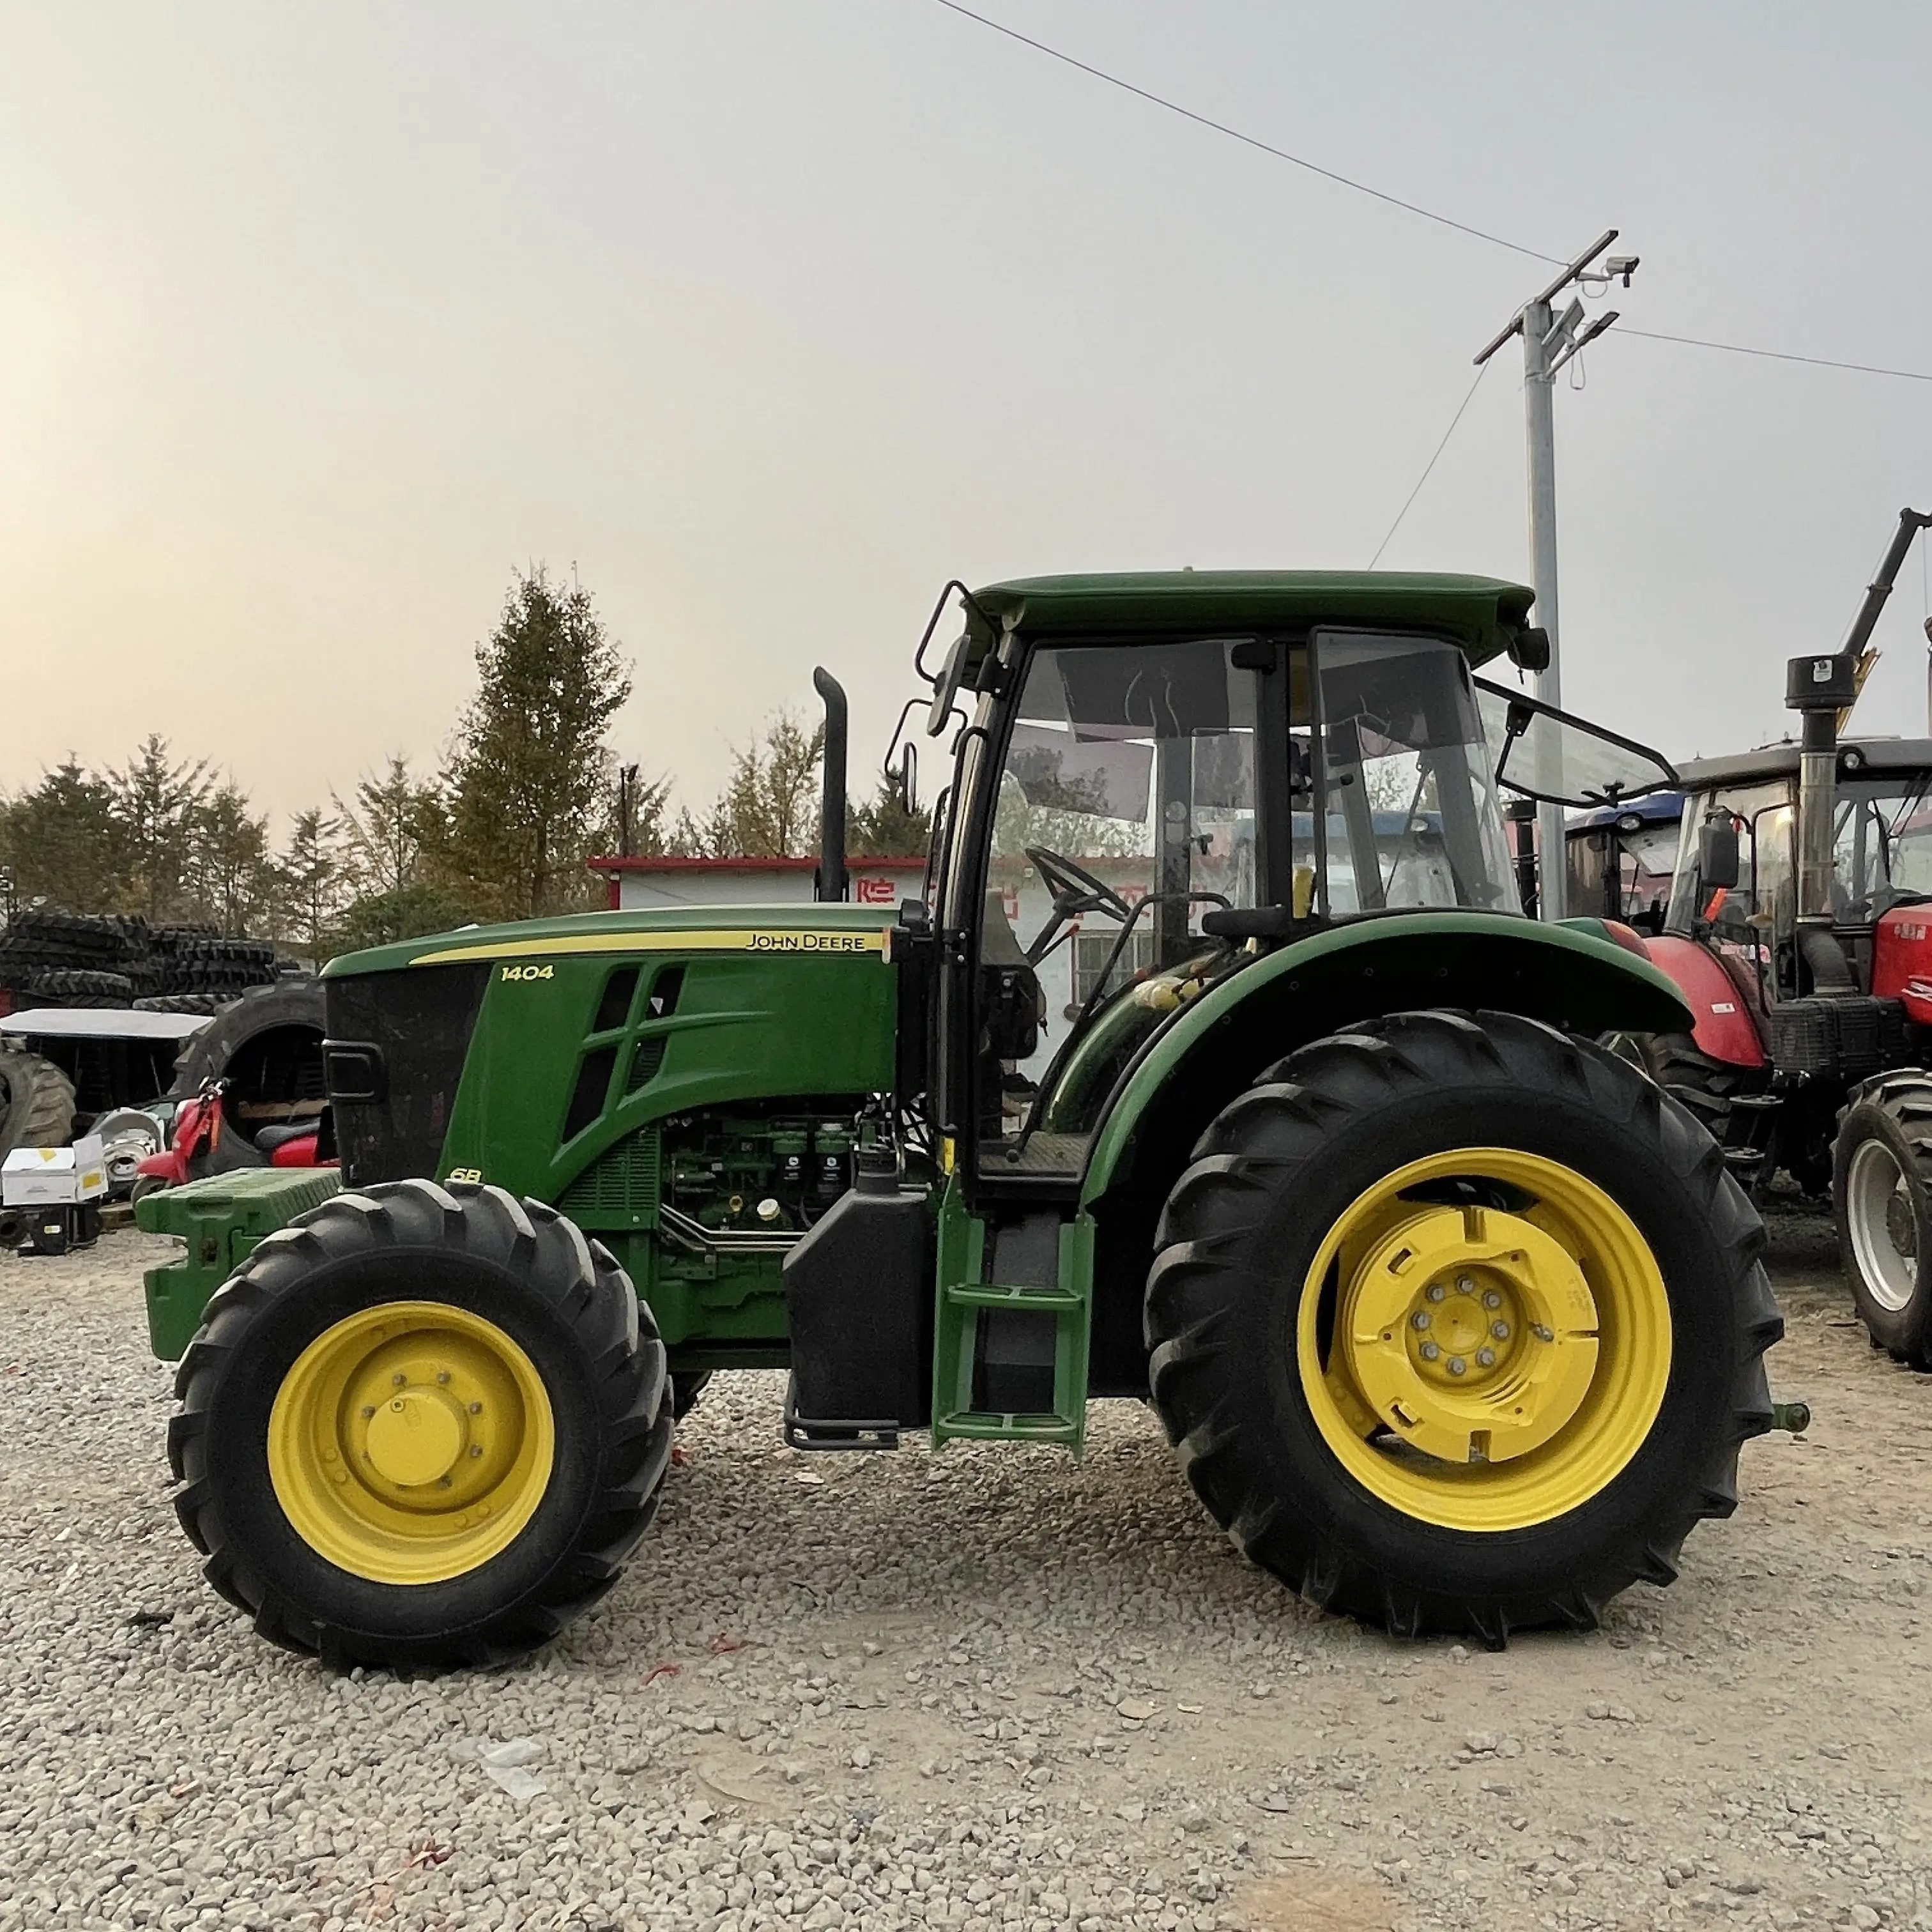 second hand used tractors John 1404 140HP Deere good quality for sale agricultural machinery farm tractor